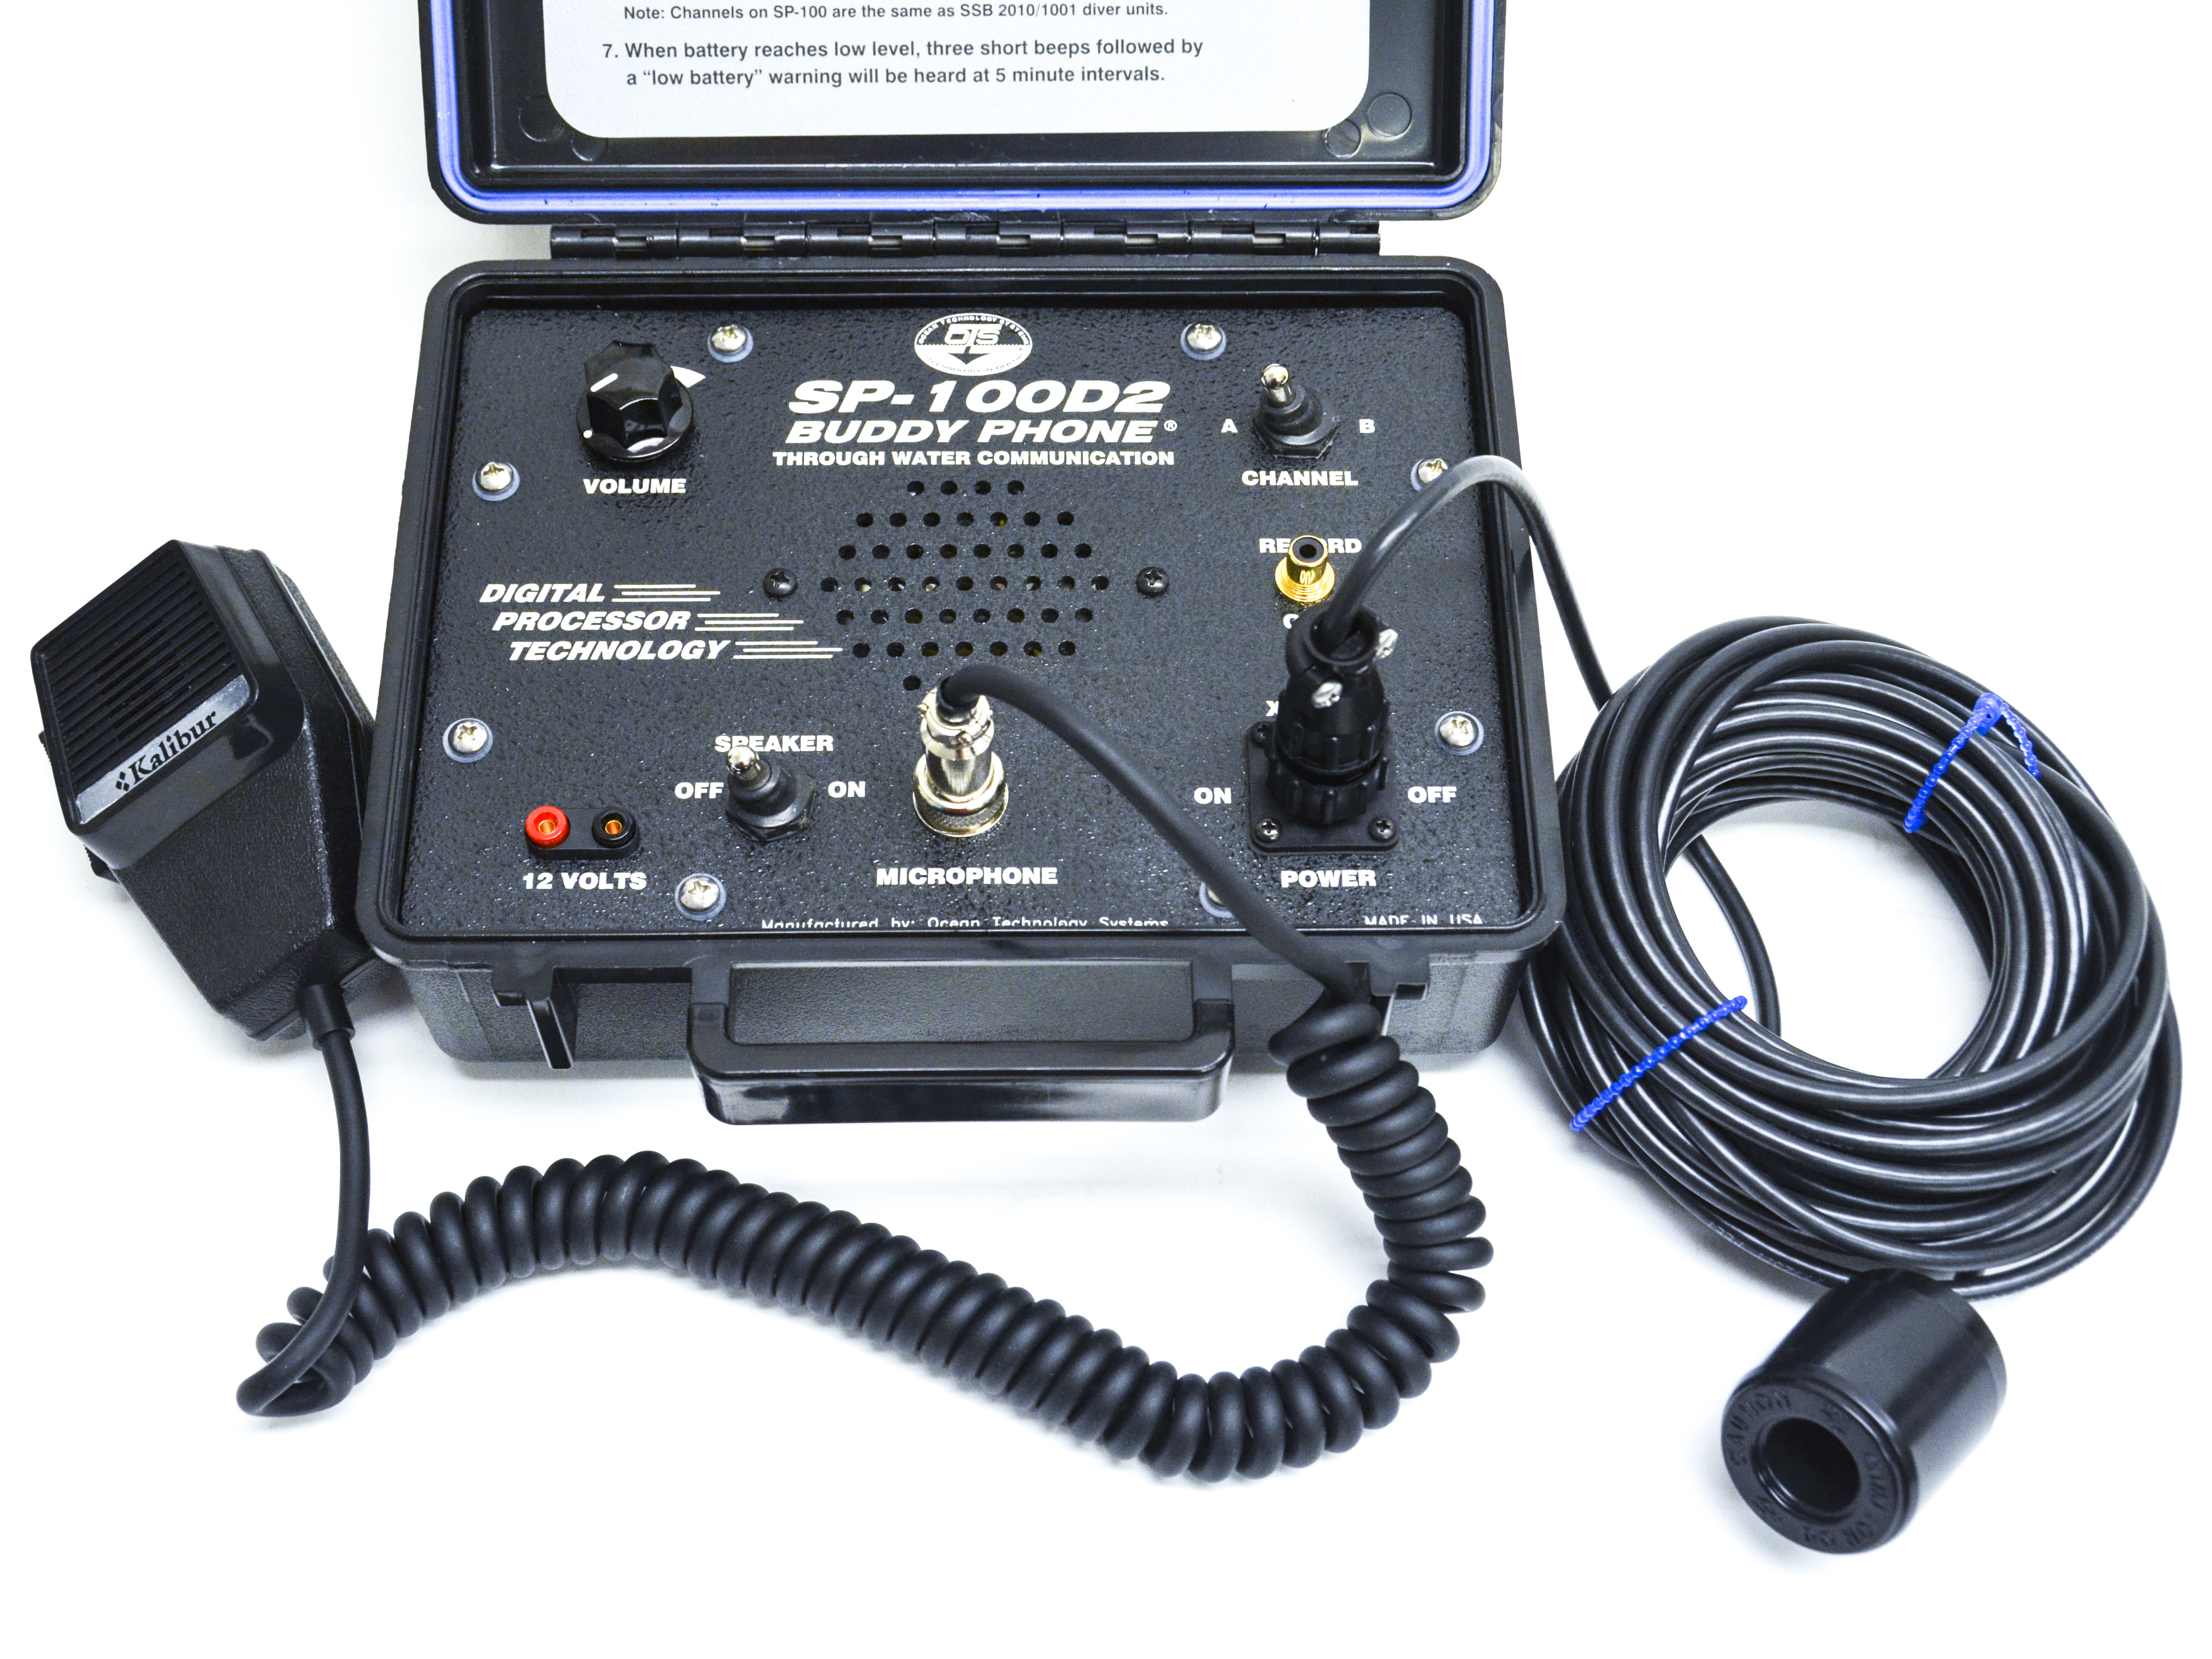 OTS SP-100D-2 BUDDY PHONE 2 CHANNEL SURFACE STATION